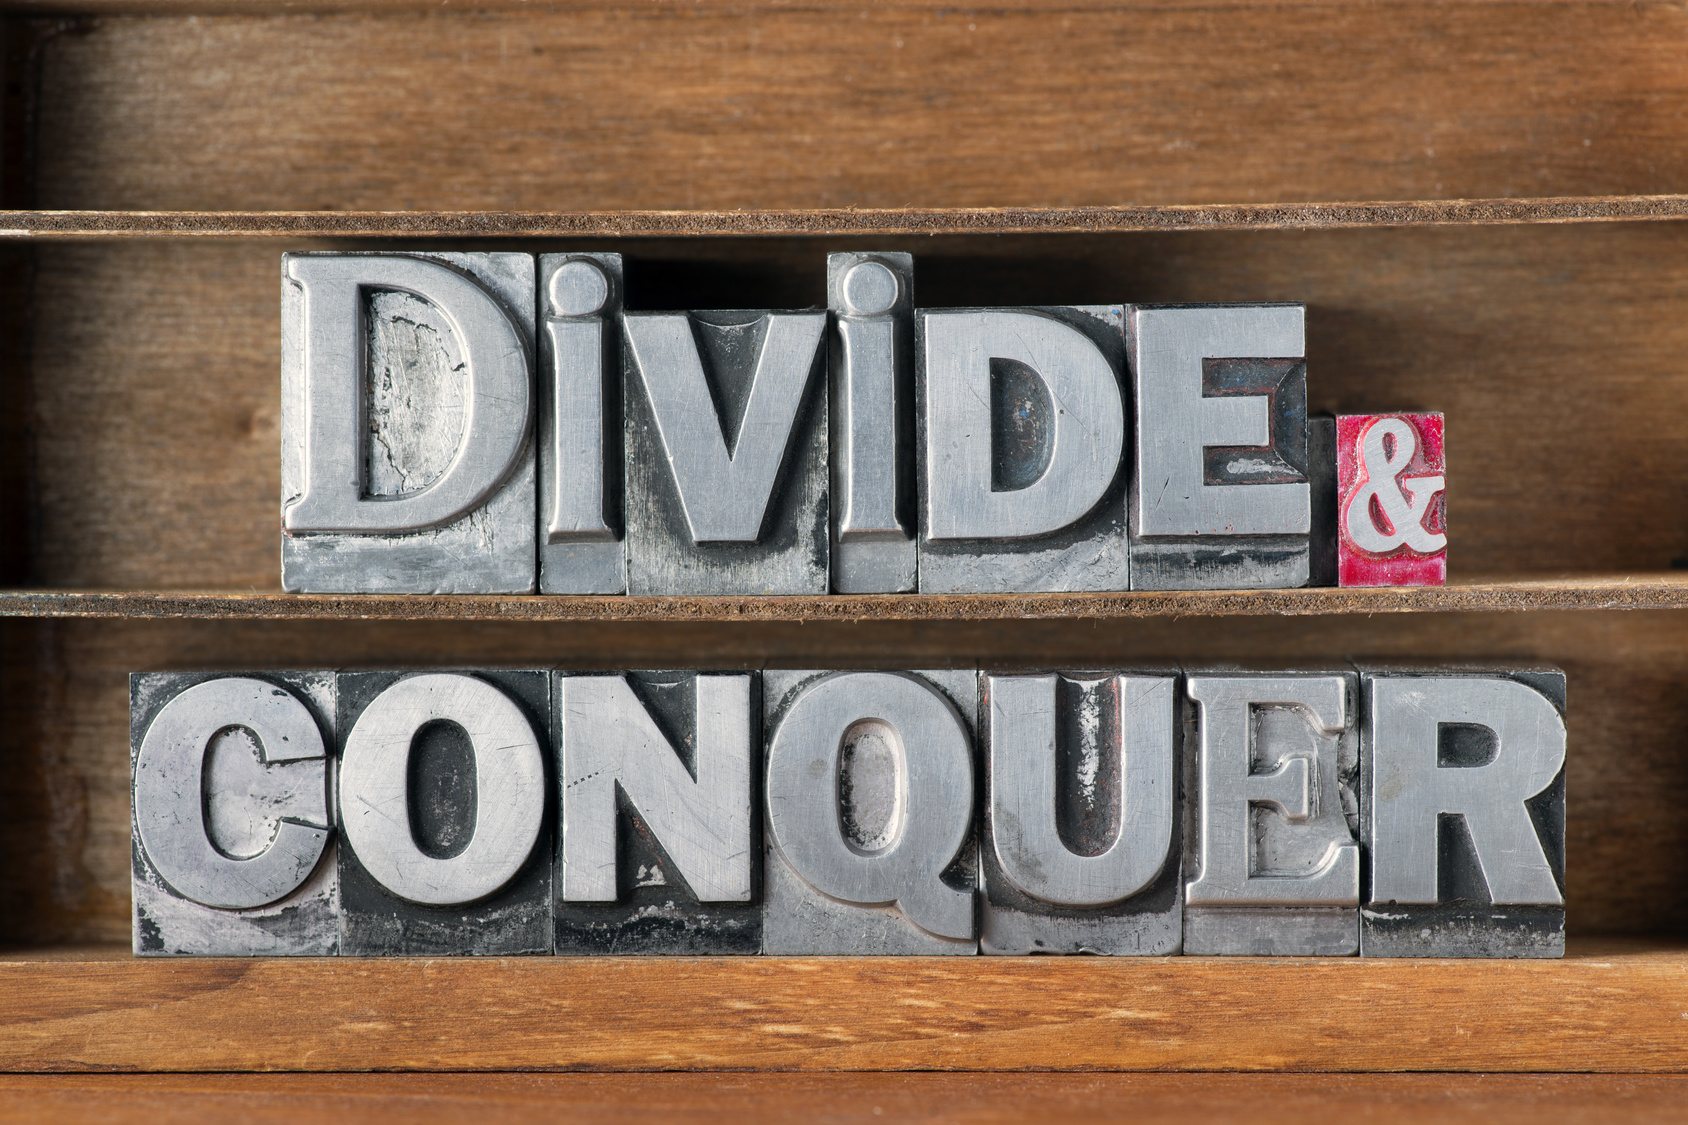 divide and conquer